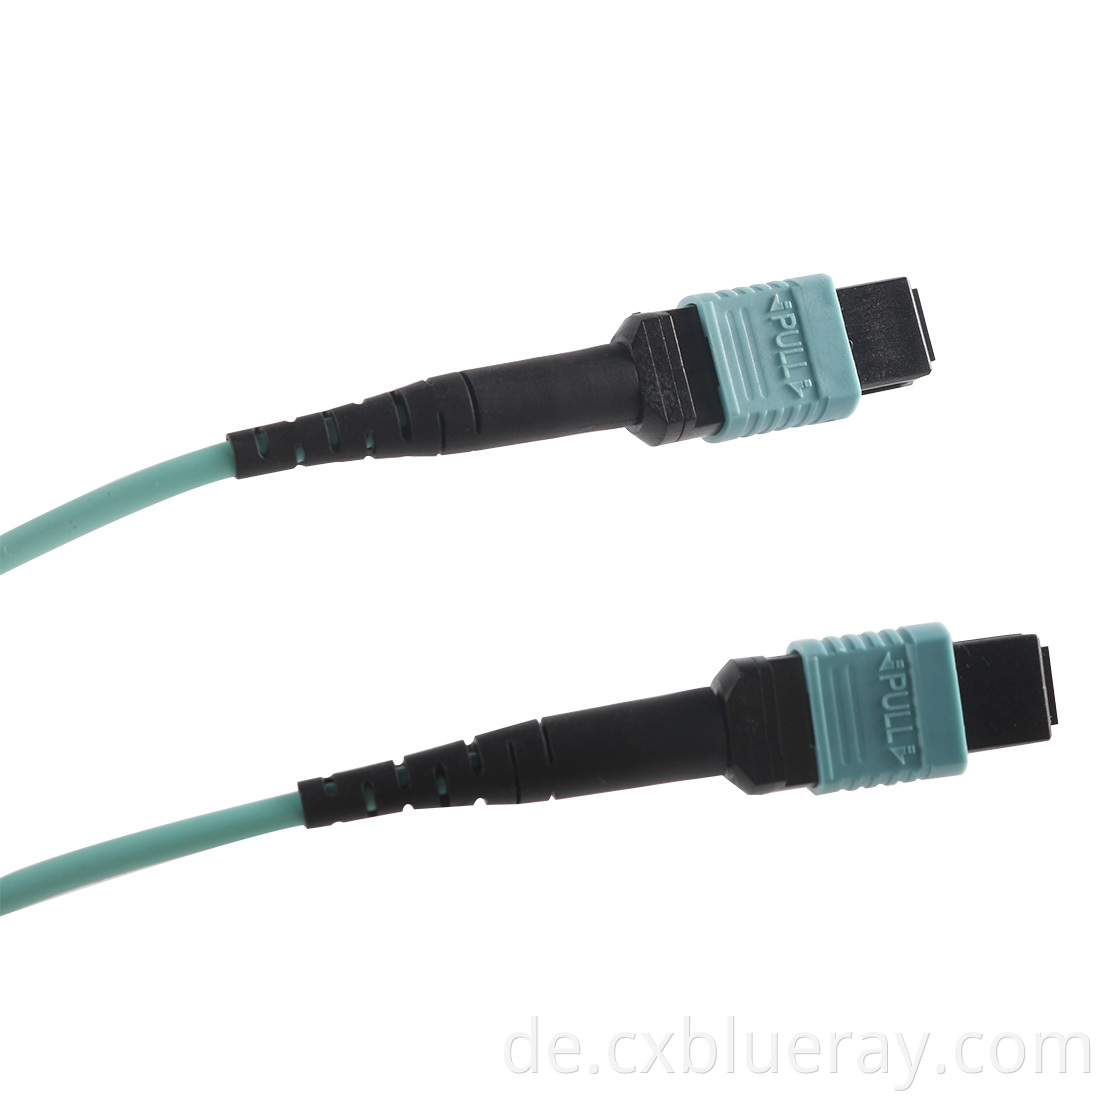 Om4 8core Trunk Cable